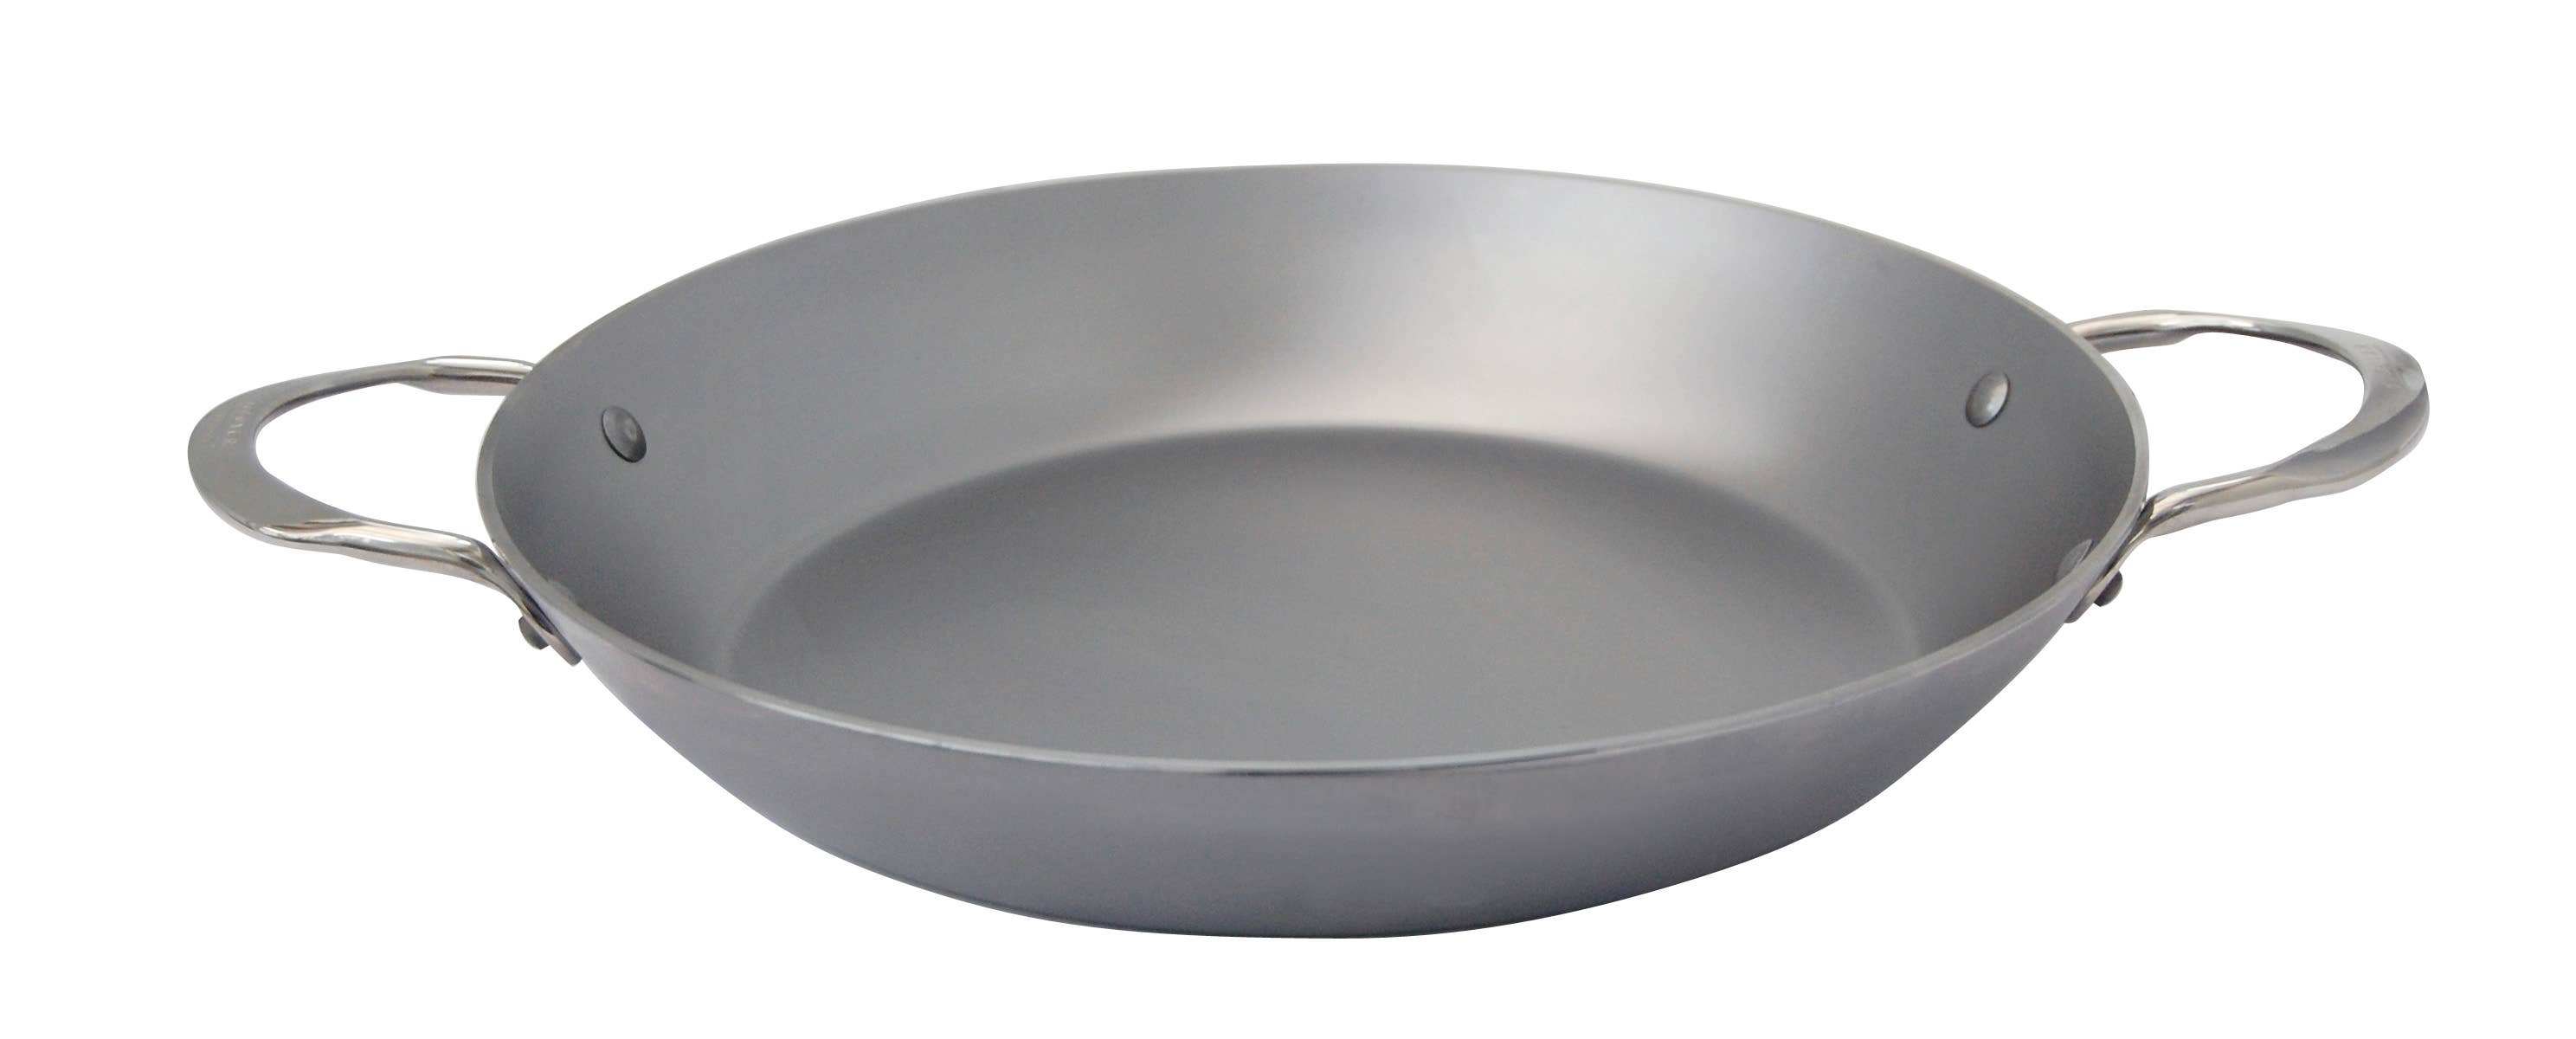 Wholesale PAELLA PAN 2 HANDLES -MINERAL B ELEMENT Ø12½'' for your